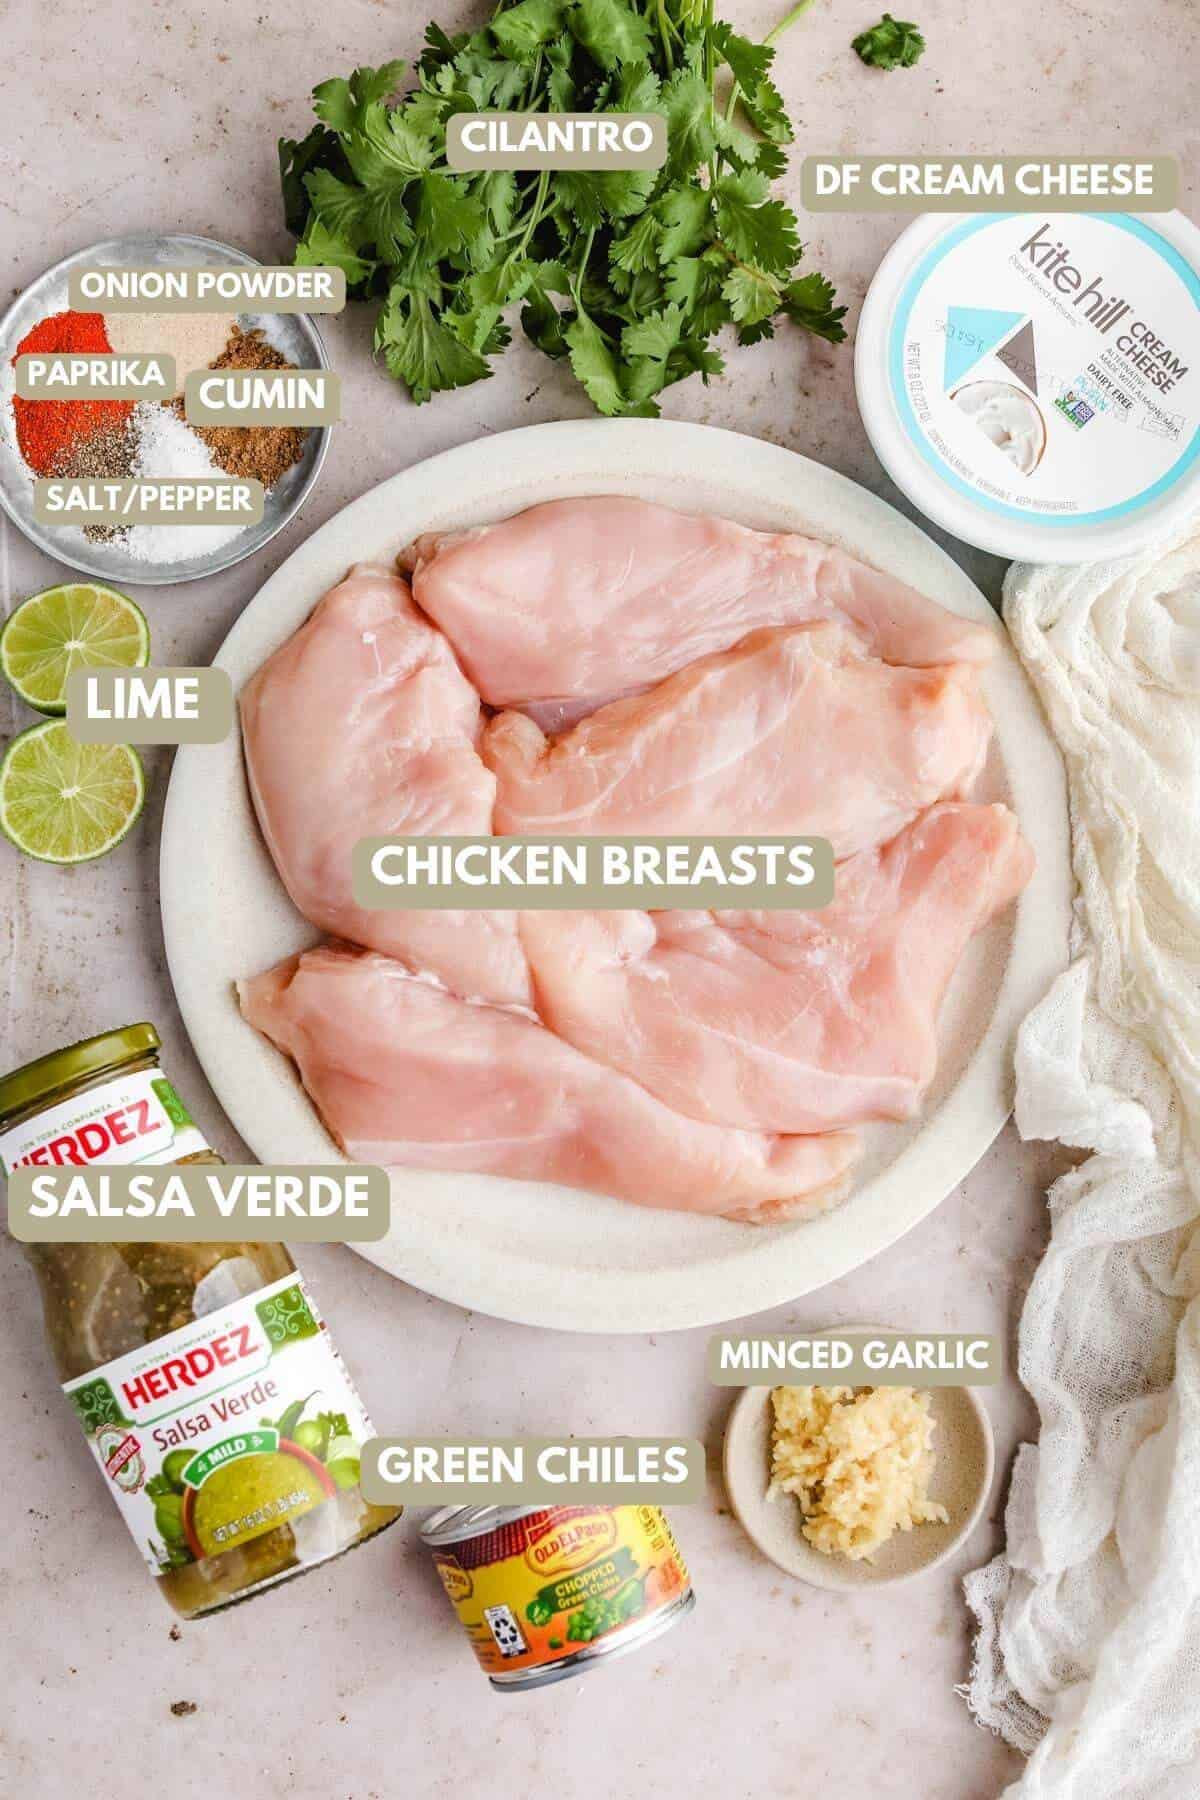 a photo with recipe ingredients labeled, including herdez salsa verde, chicken breasts, minced garlic, green chiles, lime, spices, dairy free cream chese, and fresh cilantro